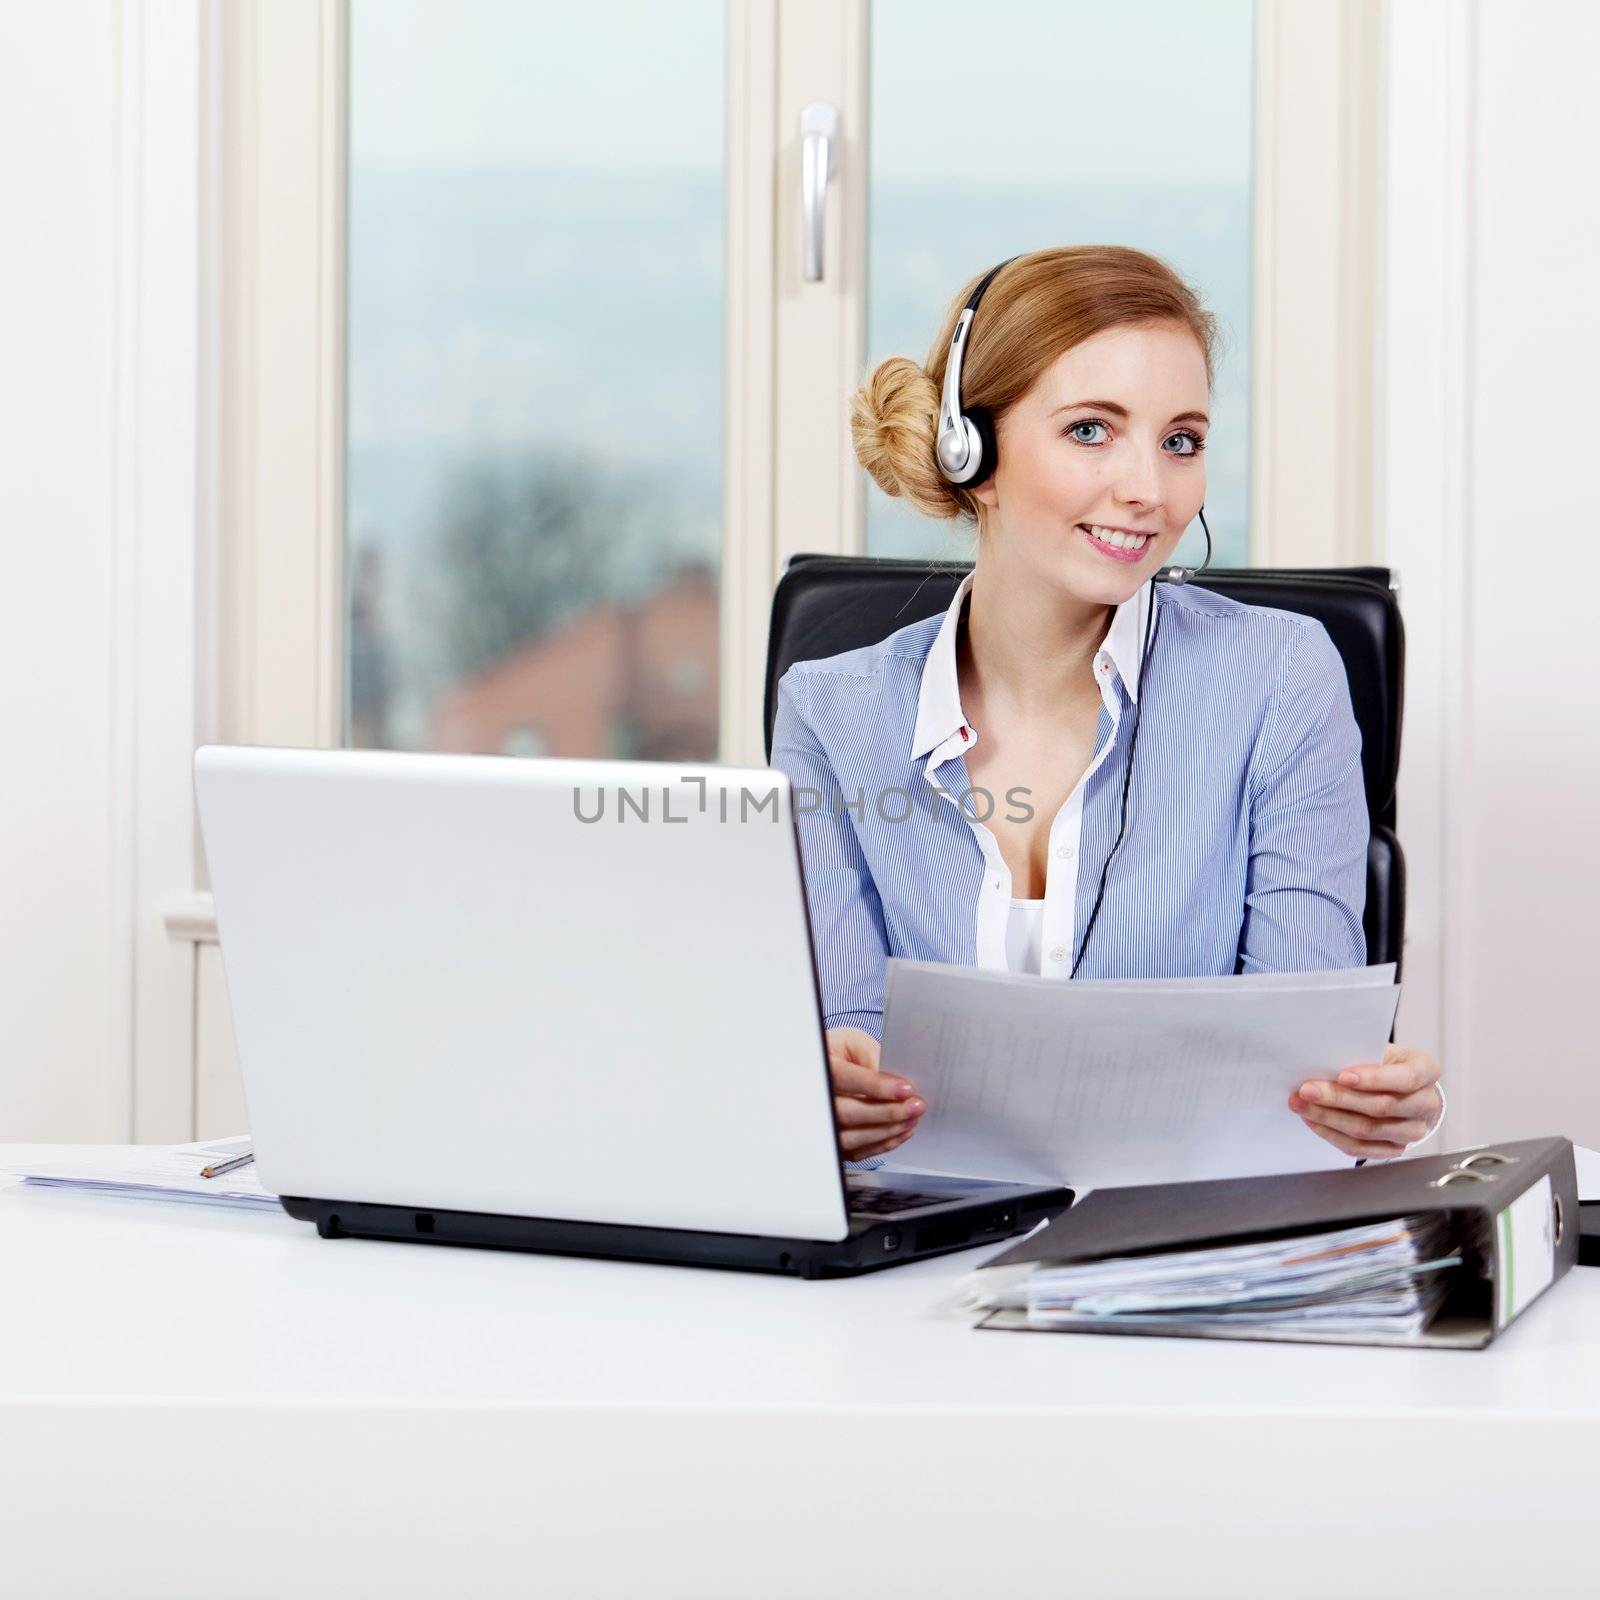 smiling young female callcenter agent with headset by juniart